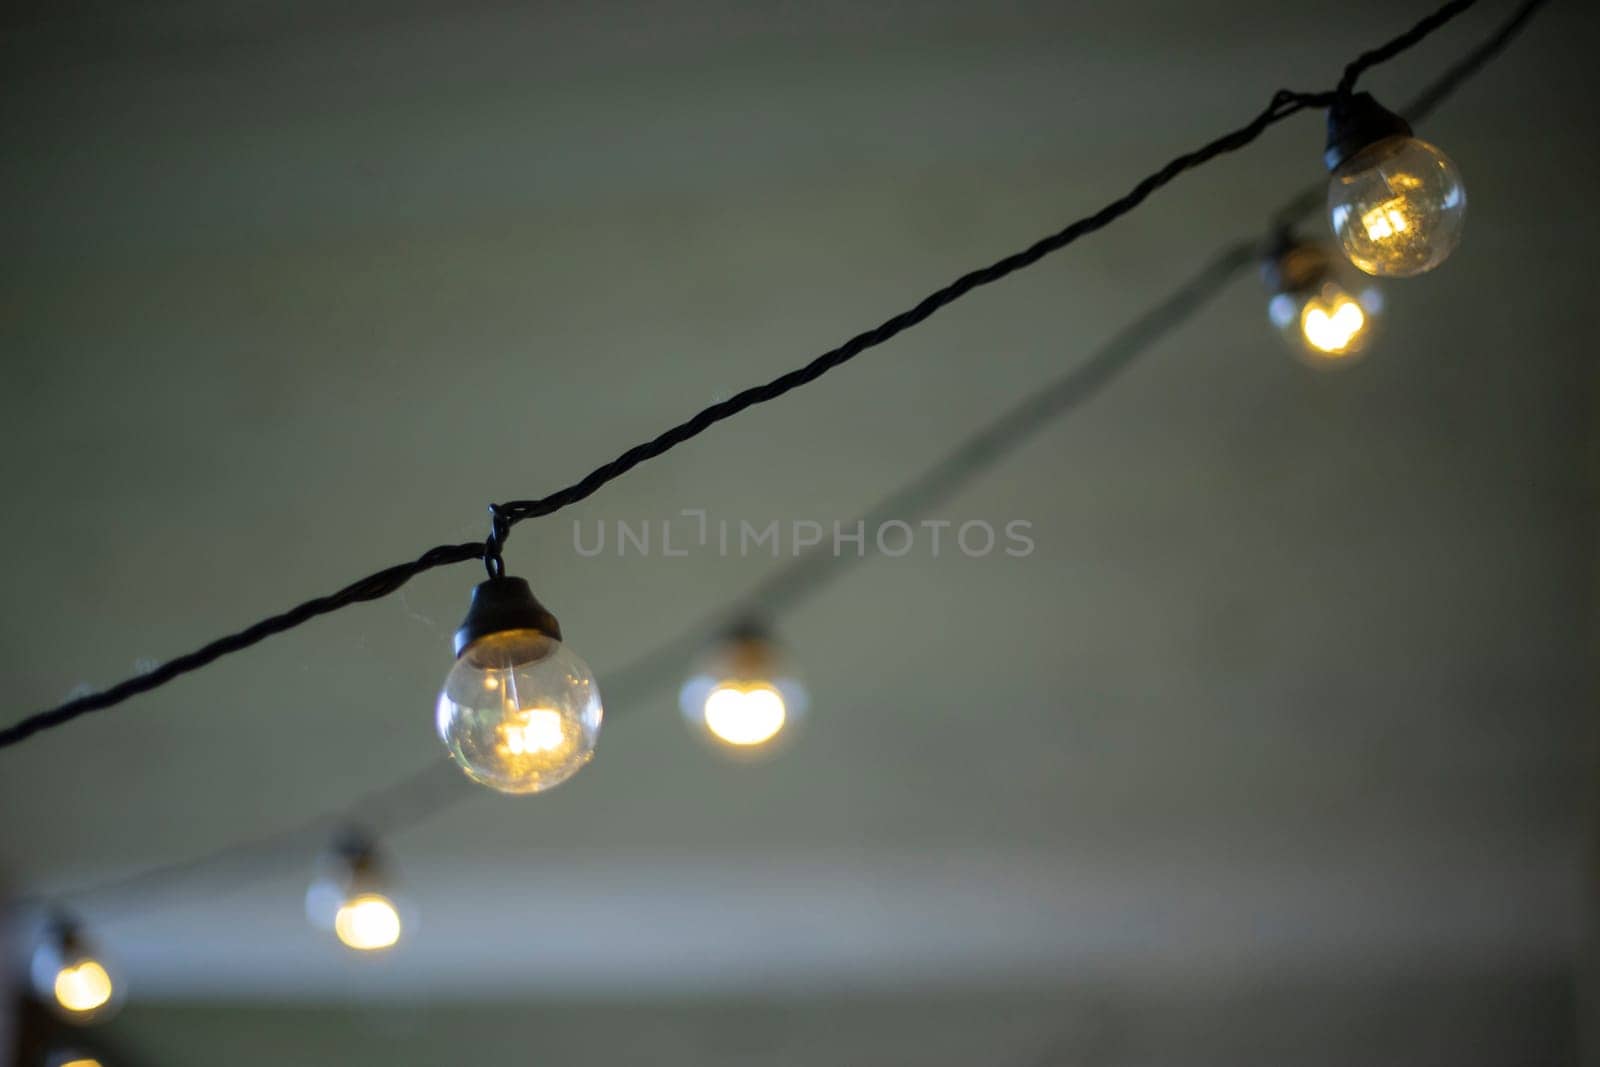 Light bulbs on wires. Garlands in interior. Incandescent lamp. Warm light.